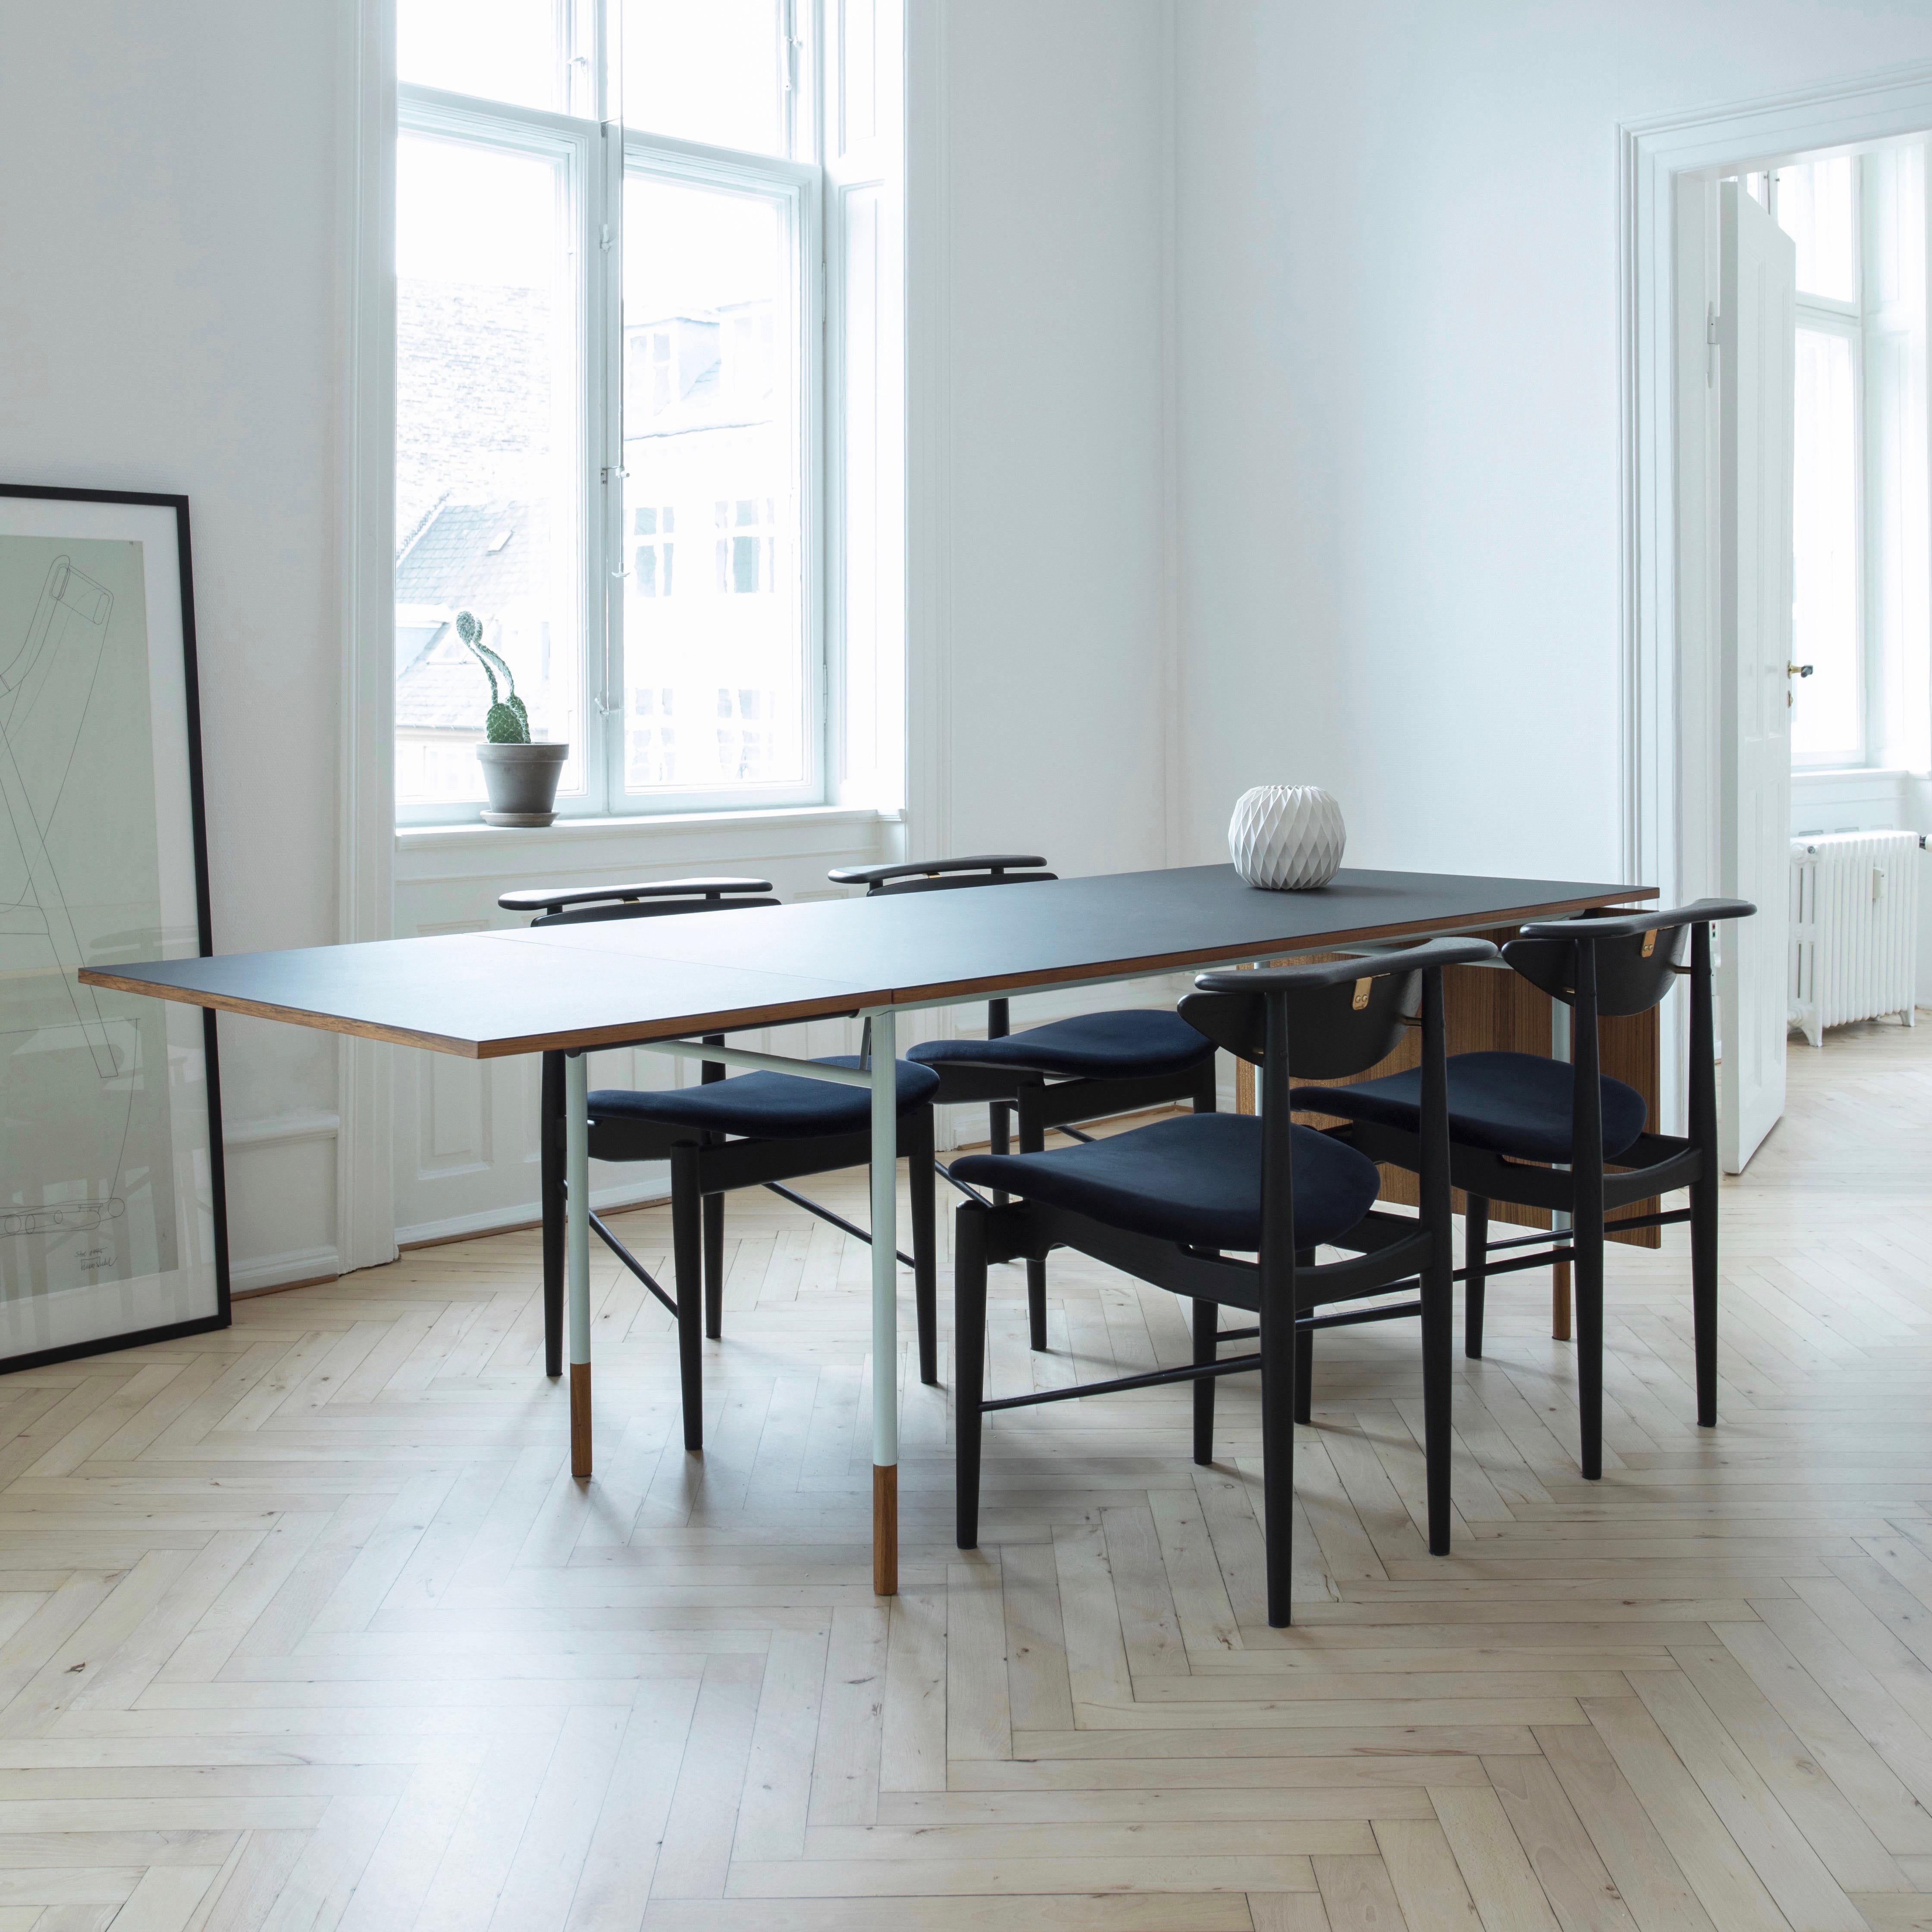 Finn Juhl Nyhavn Dining Table with Two Drop Leaves, Lino and Wood 2